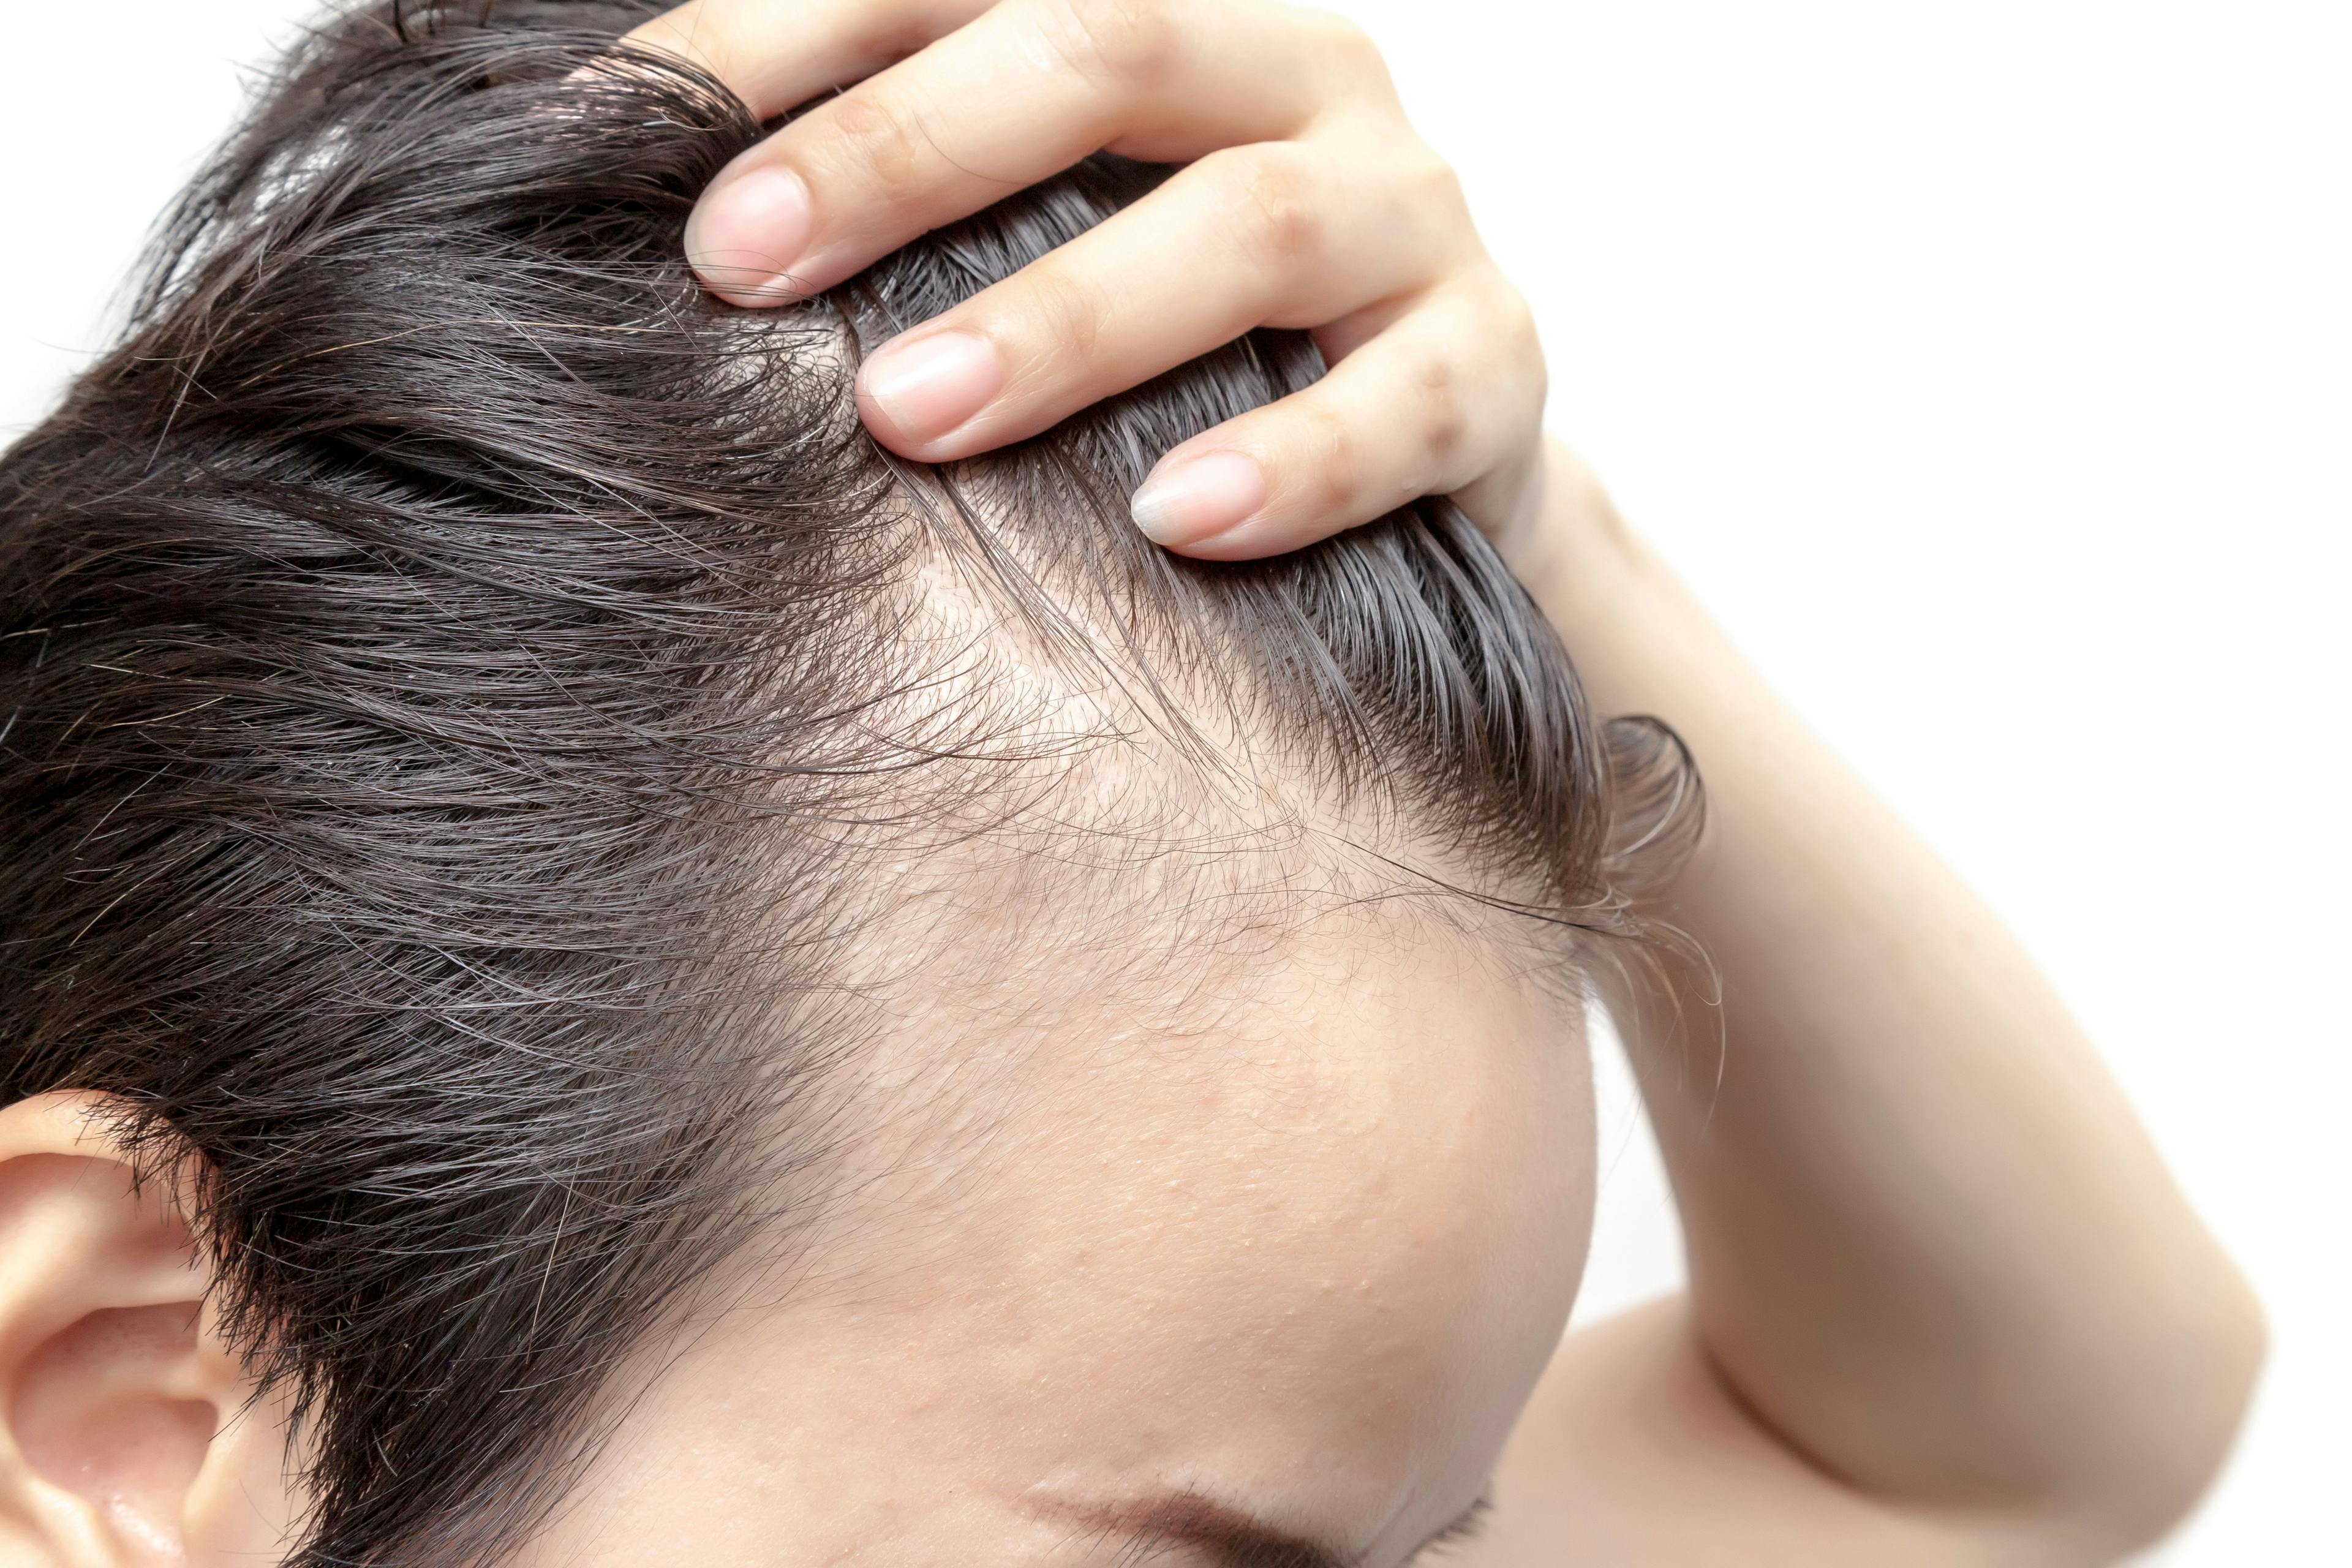 Combination of Two Drugs Effective In Treating Alopecia